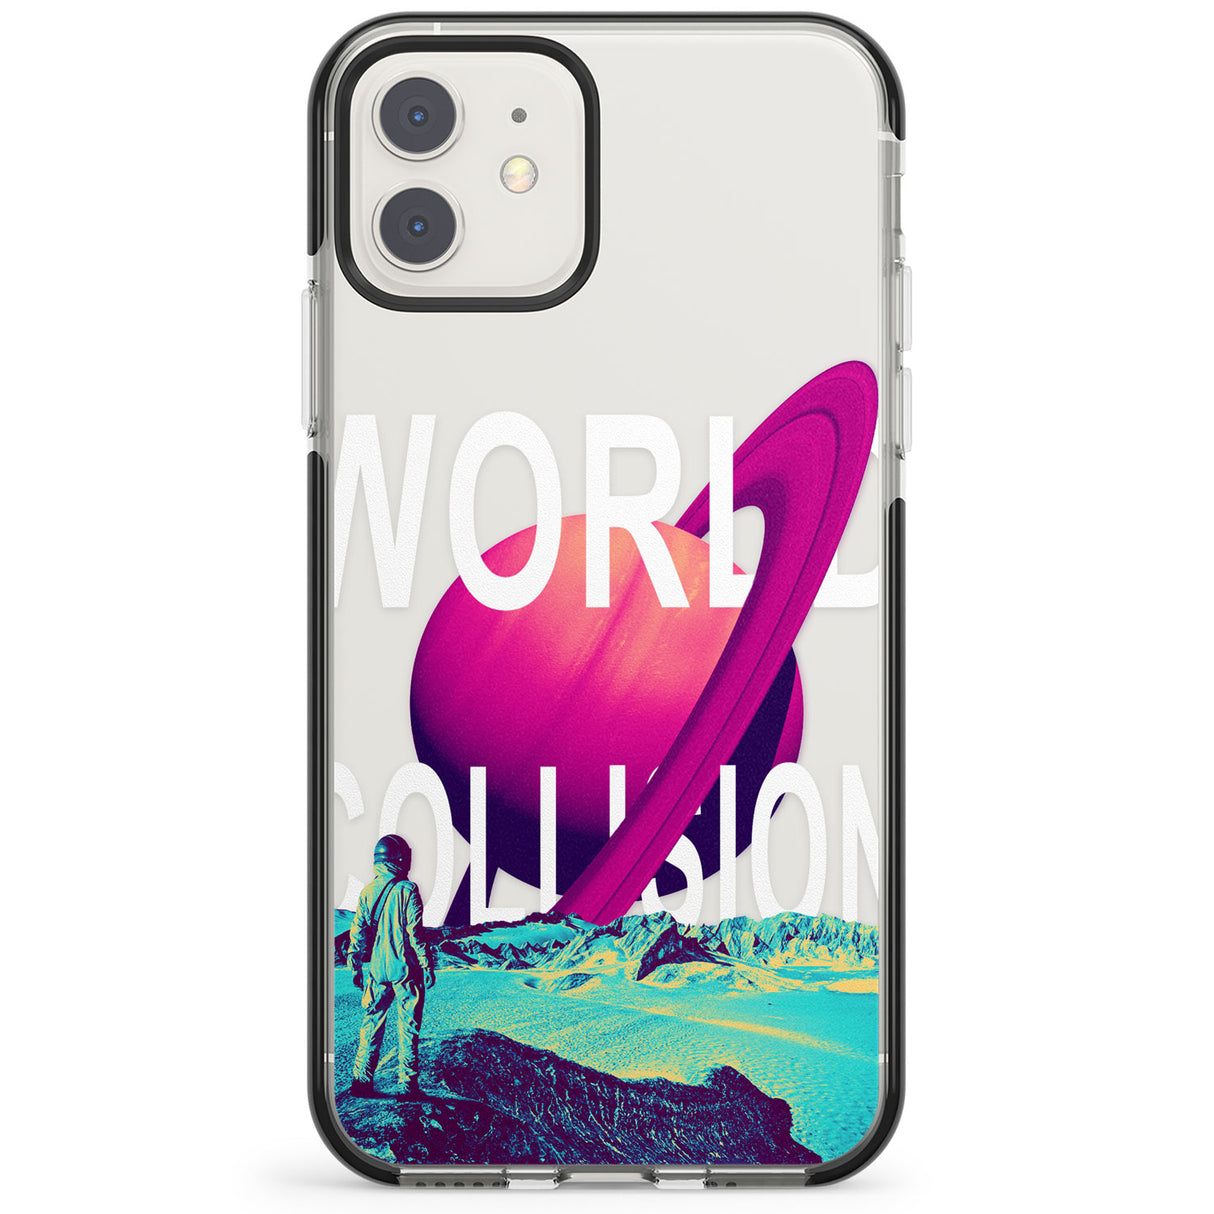 World Collision Impact Phone Case for iPhone 11, iphone 12